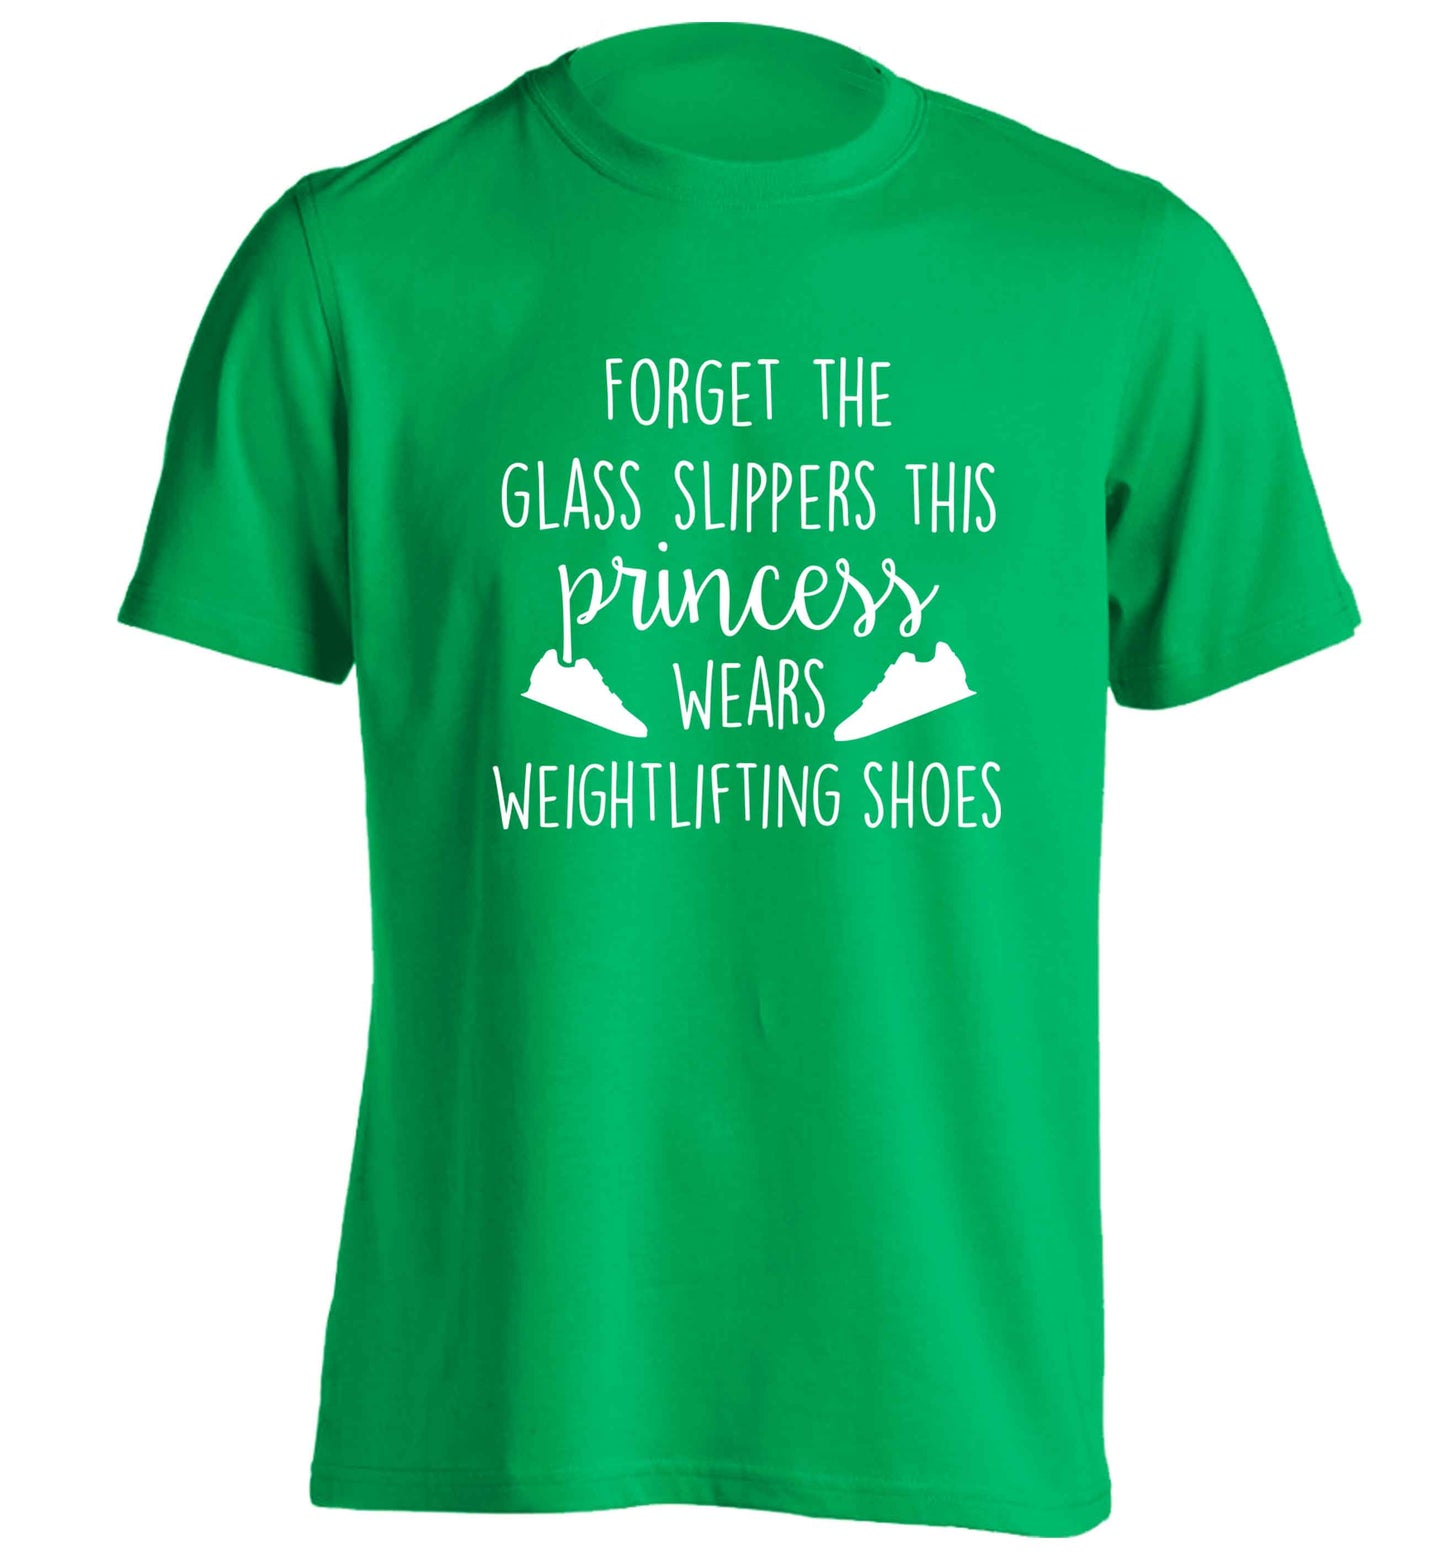 Forget the glass slippers this princess wears weightlifting shoes adults unisex green Tshirt 2XL